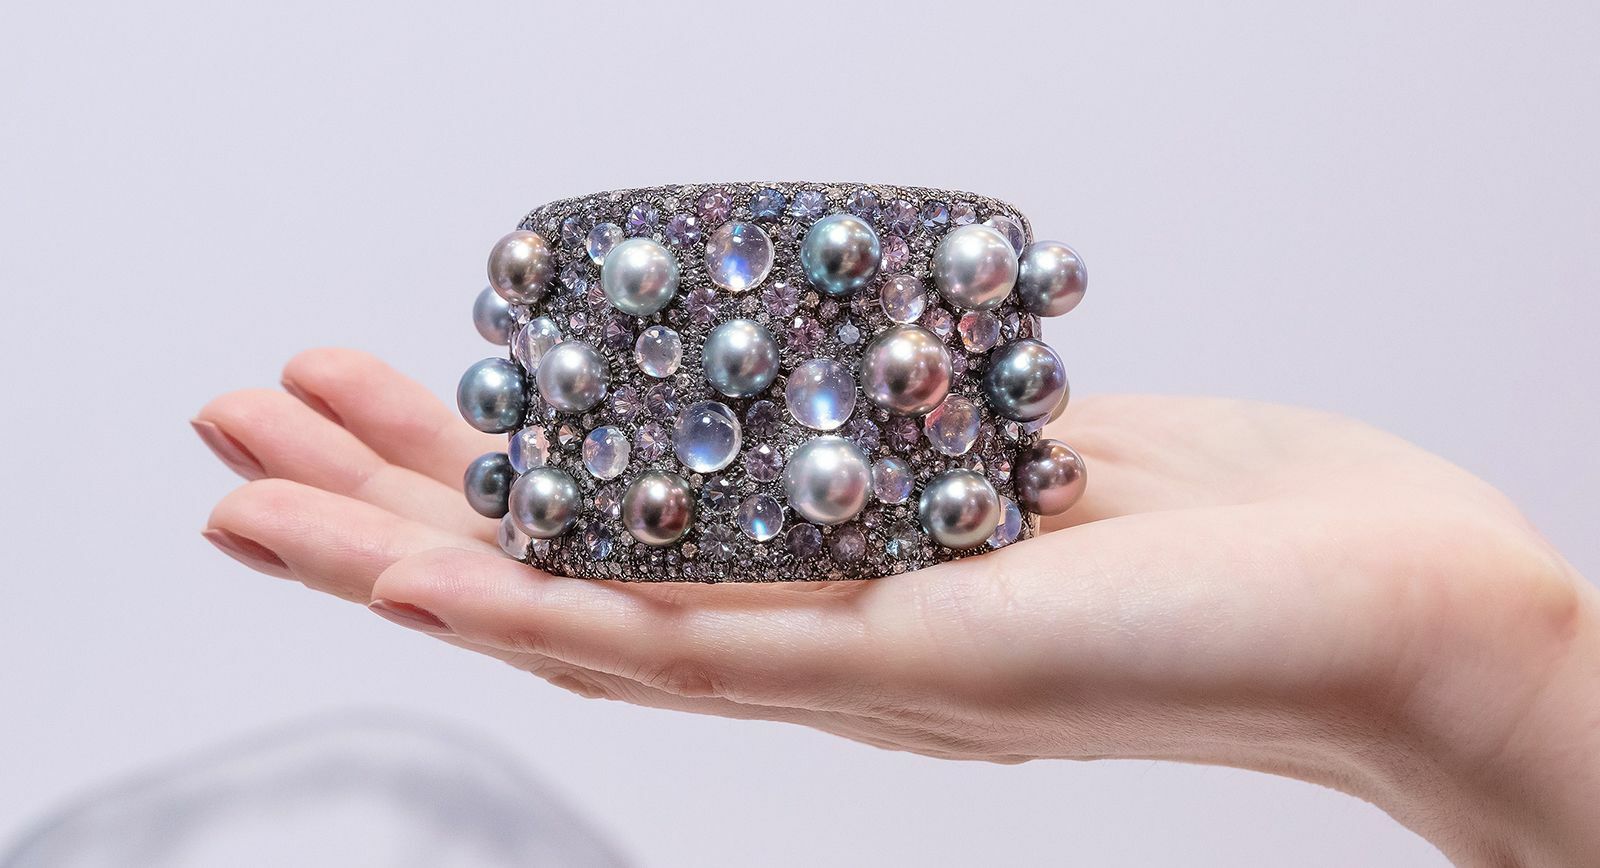 Assael cuff with moonstones, Tahitian pearls and more than 60 carats of lavender spinel